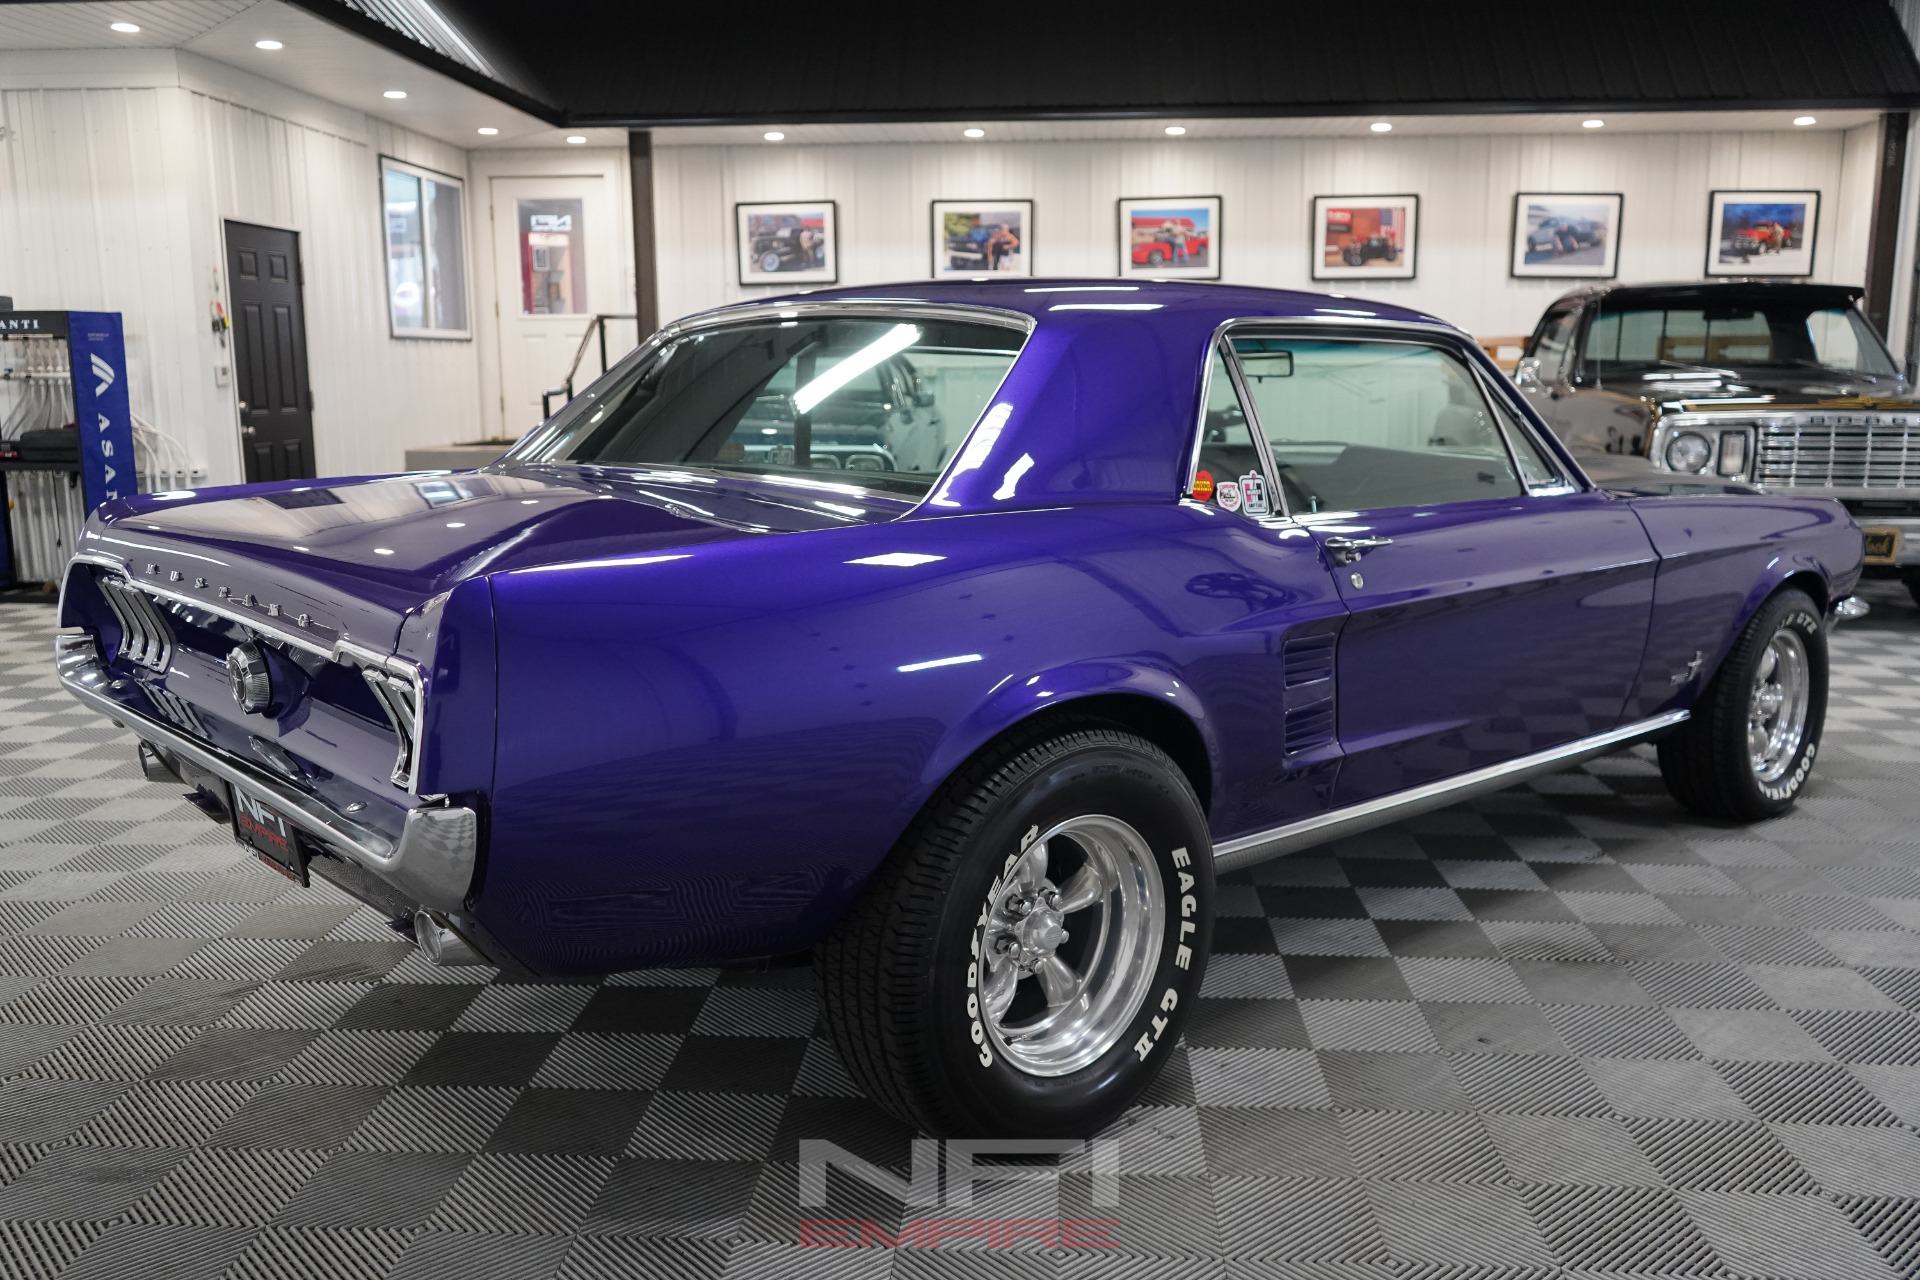 1967 Ford Mustang 8